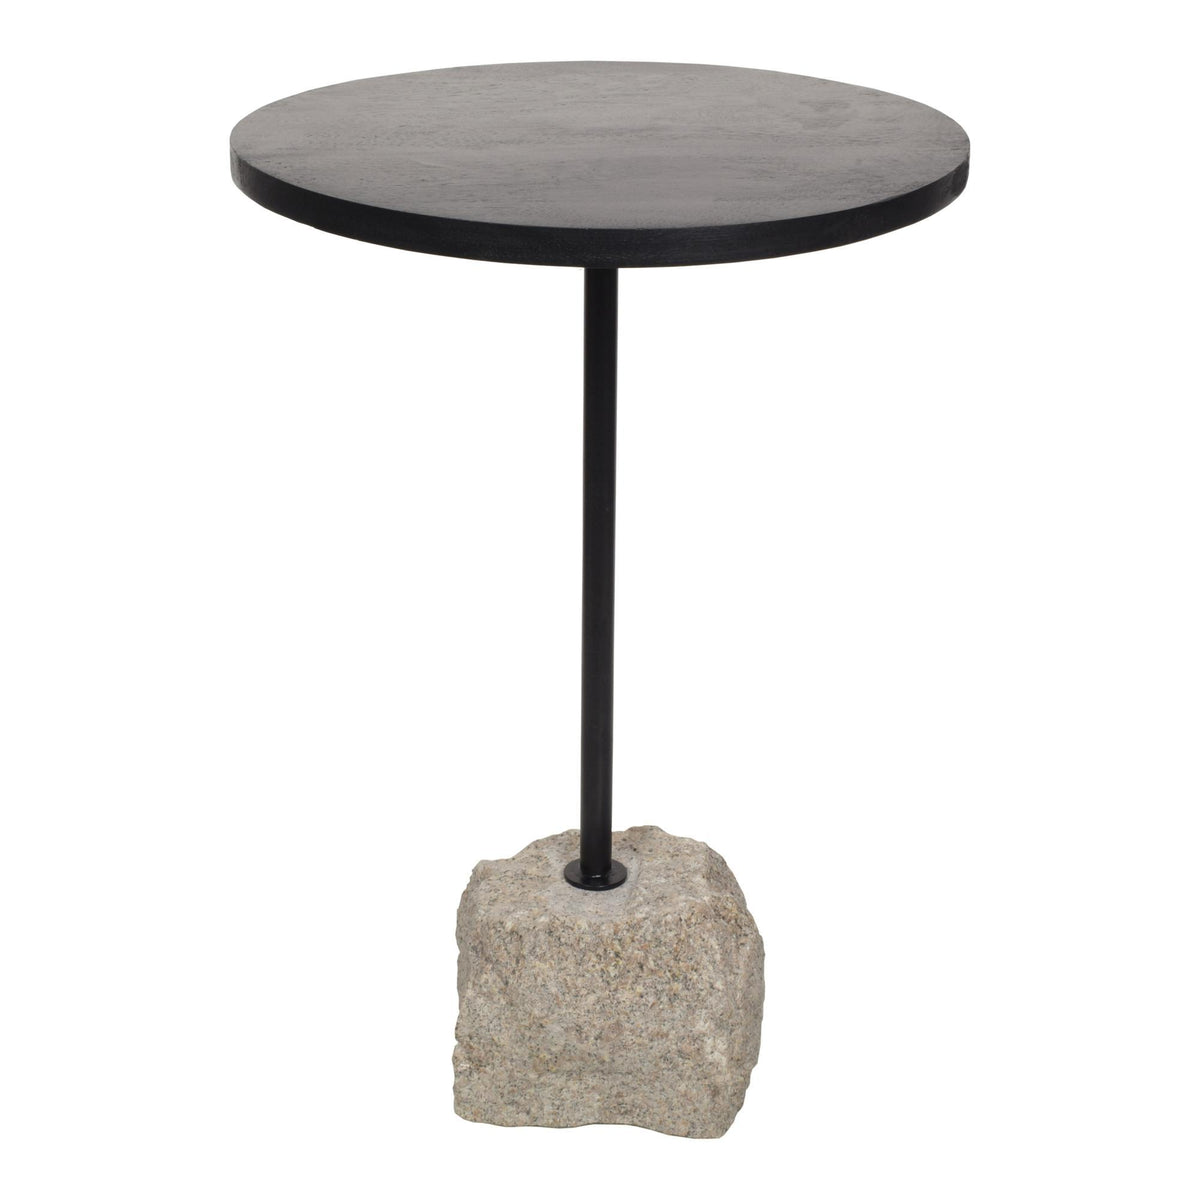 Moe's Home Collection Colo Accent Table Black - FI-1101-02